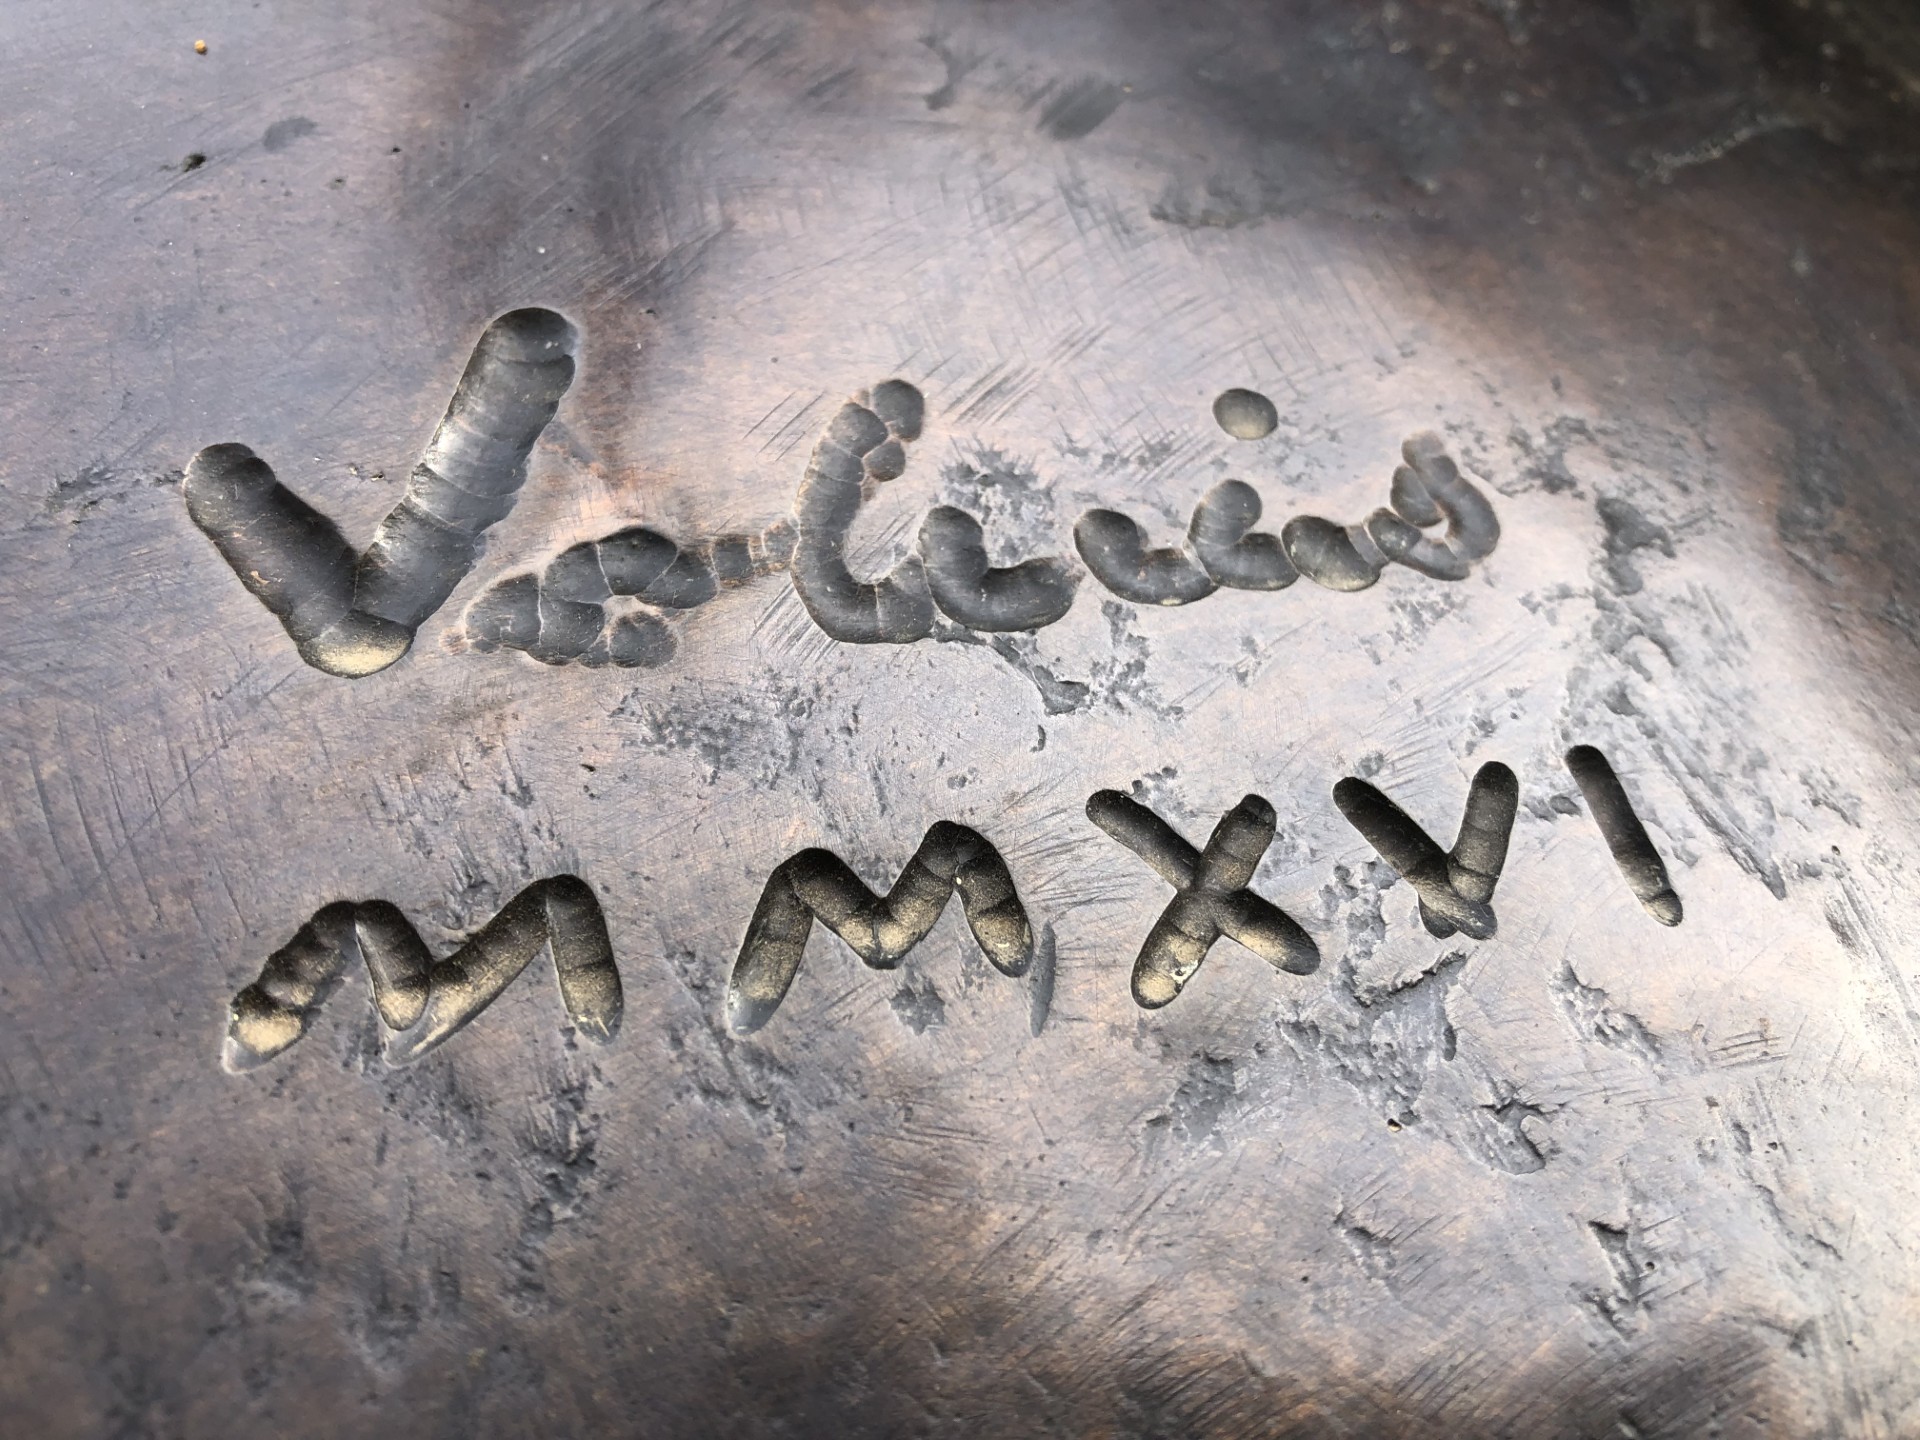 Sculptor Carl Valerius' signature on his life-size sculpture of Bill the Bastard at Harden